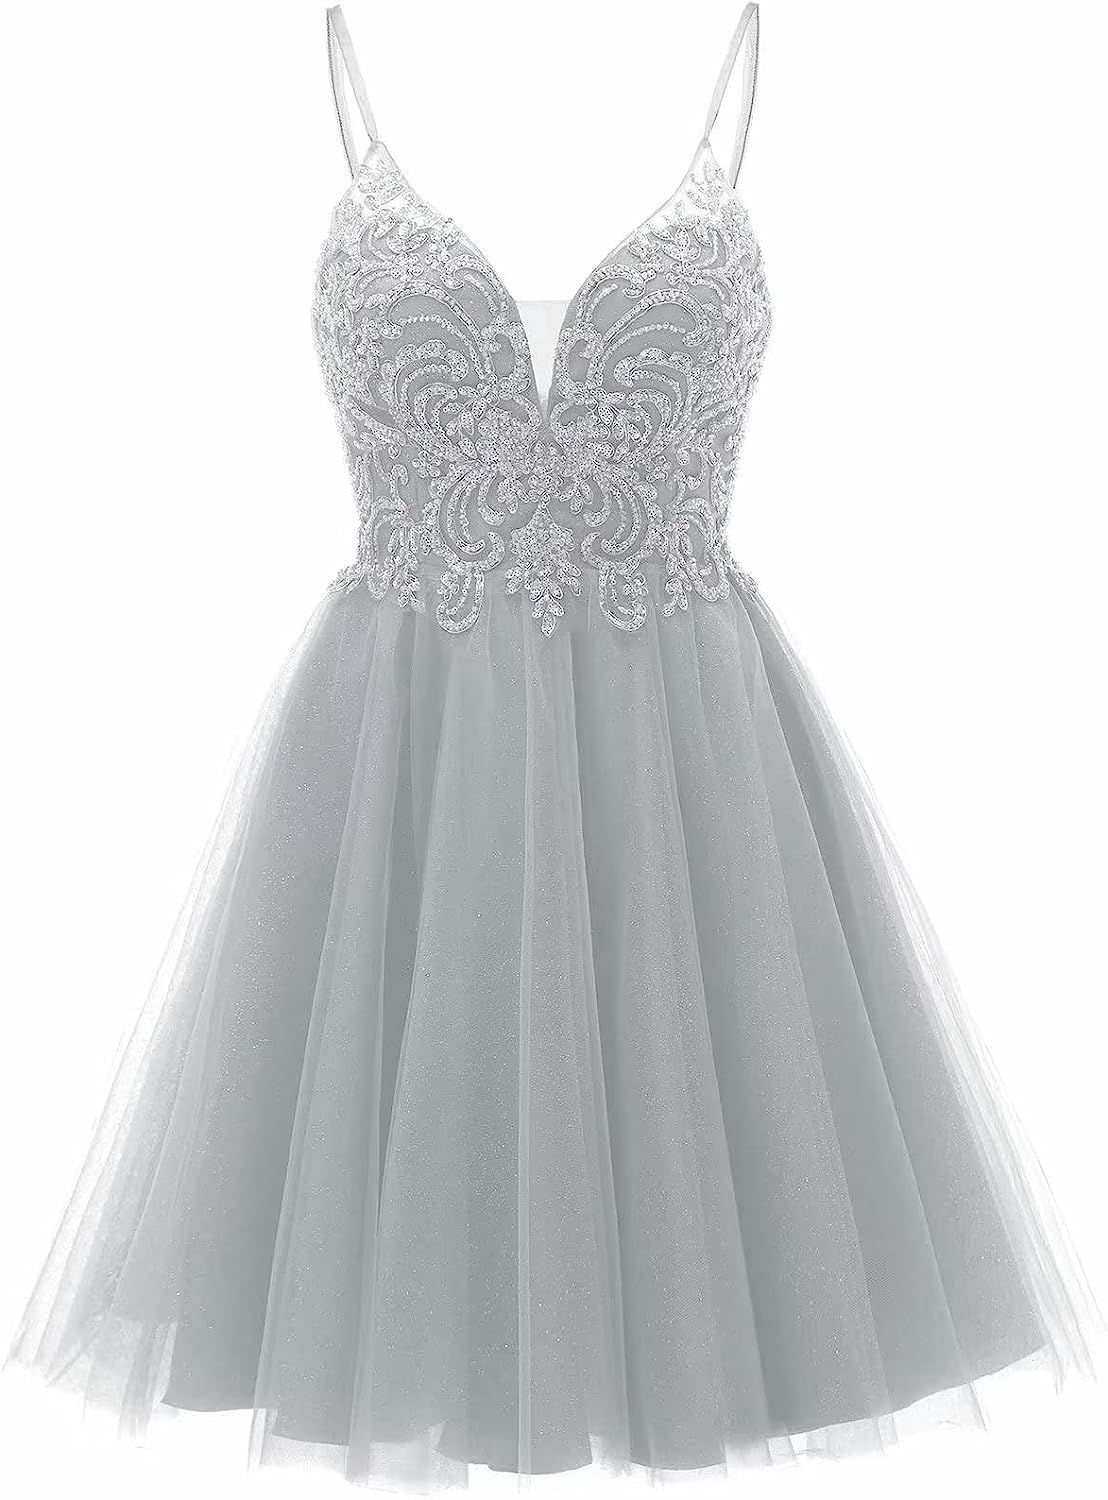 Tulle Prom Dresses Short Teens Homecoming Dresses Lace Cocktail Party Dress | Amazon (US)